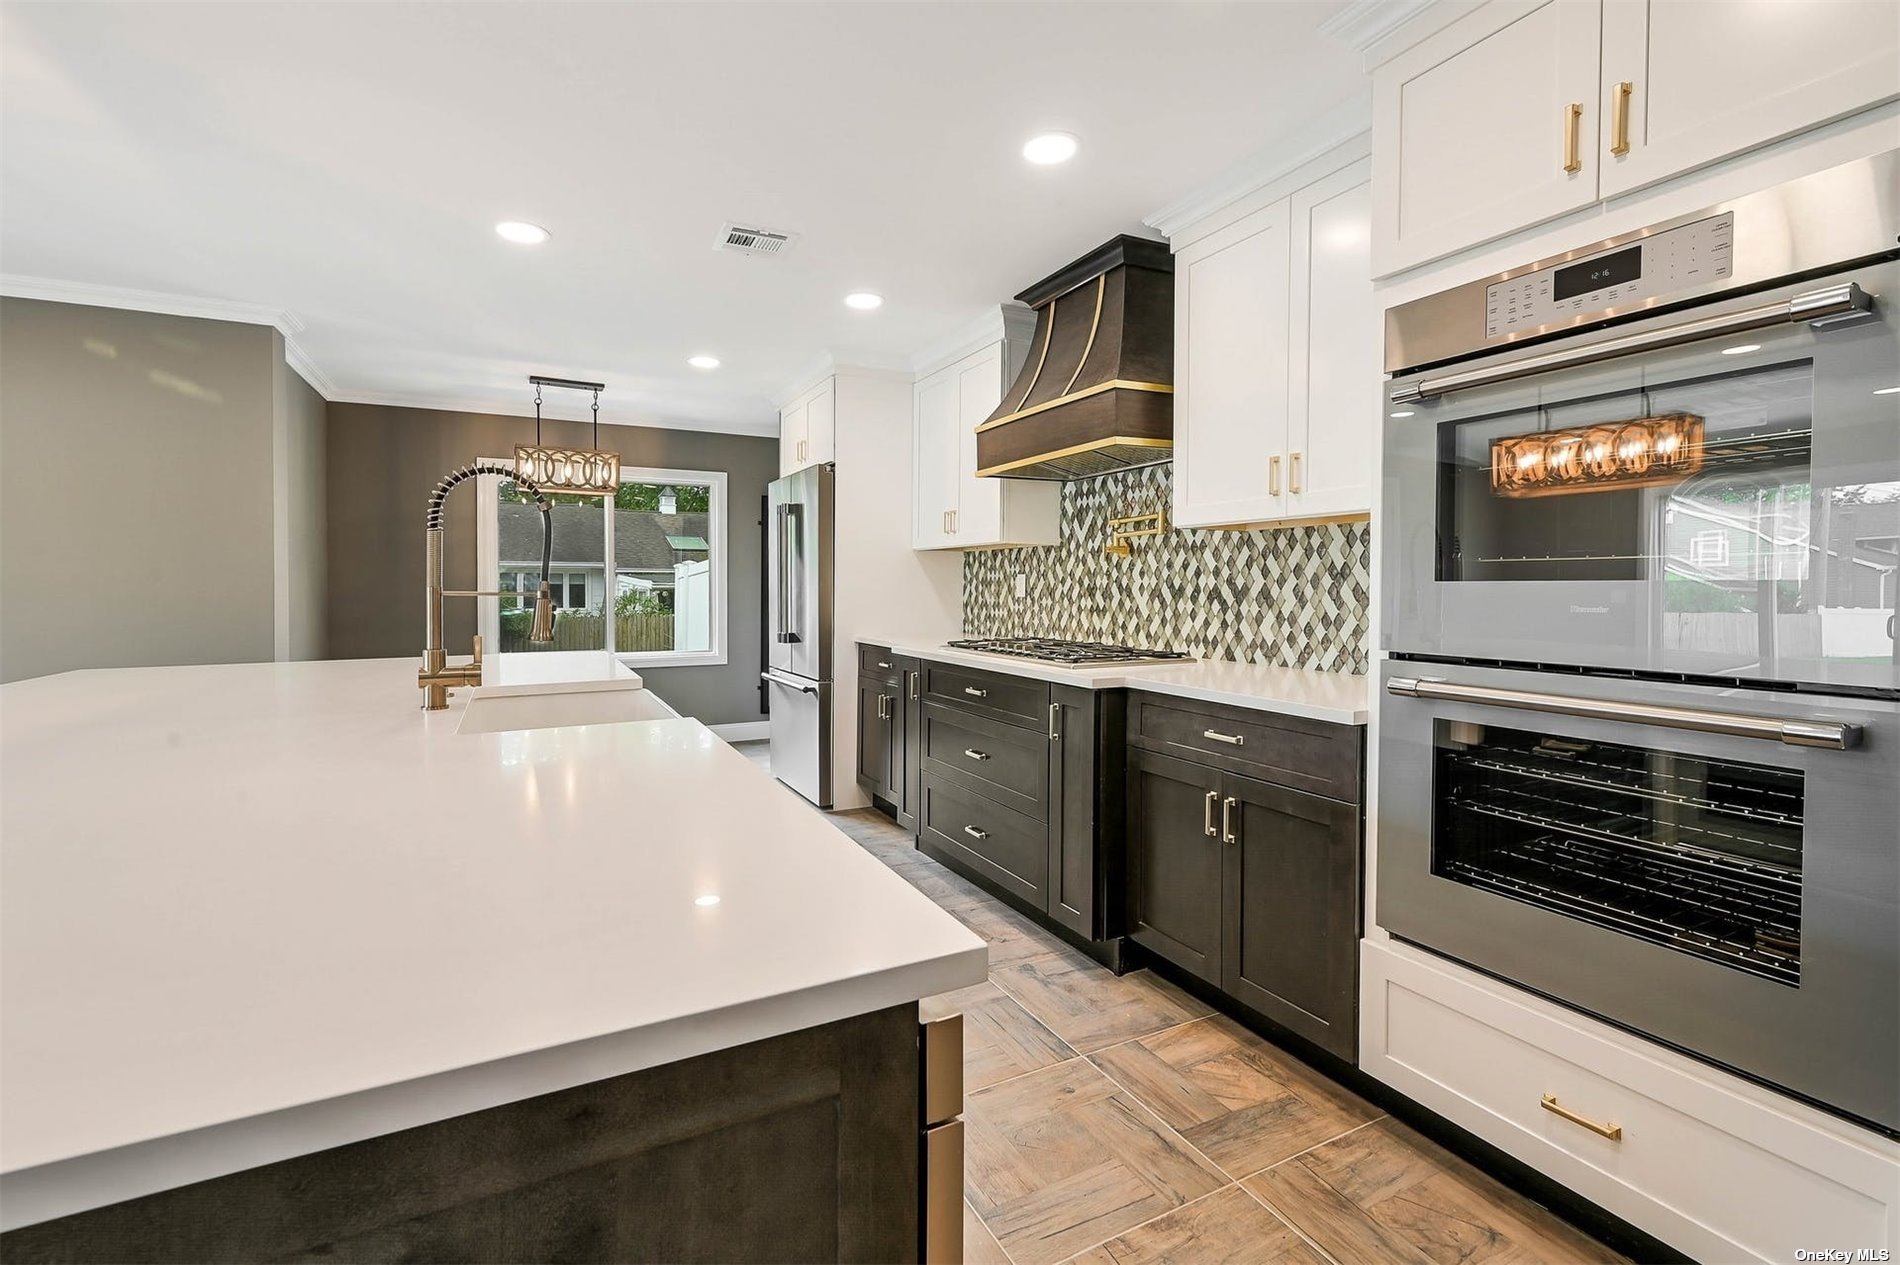 a kitchen with stainless steel appliances kitchen island granite countertop a stove top oven and sink